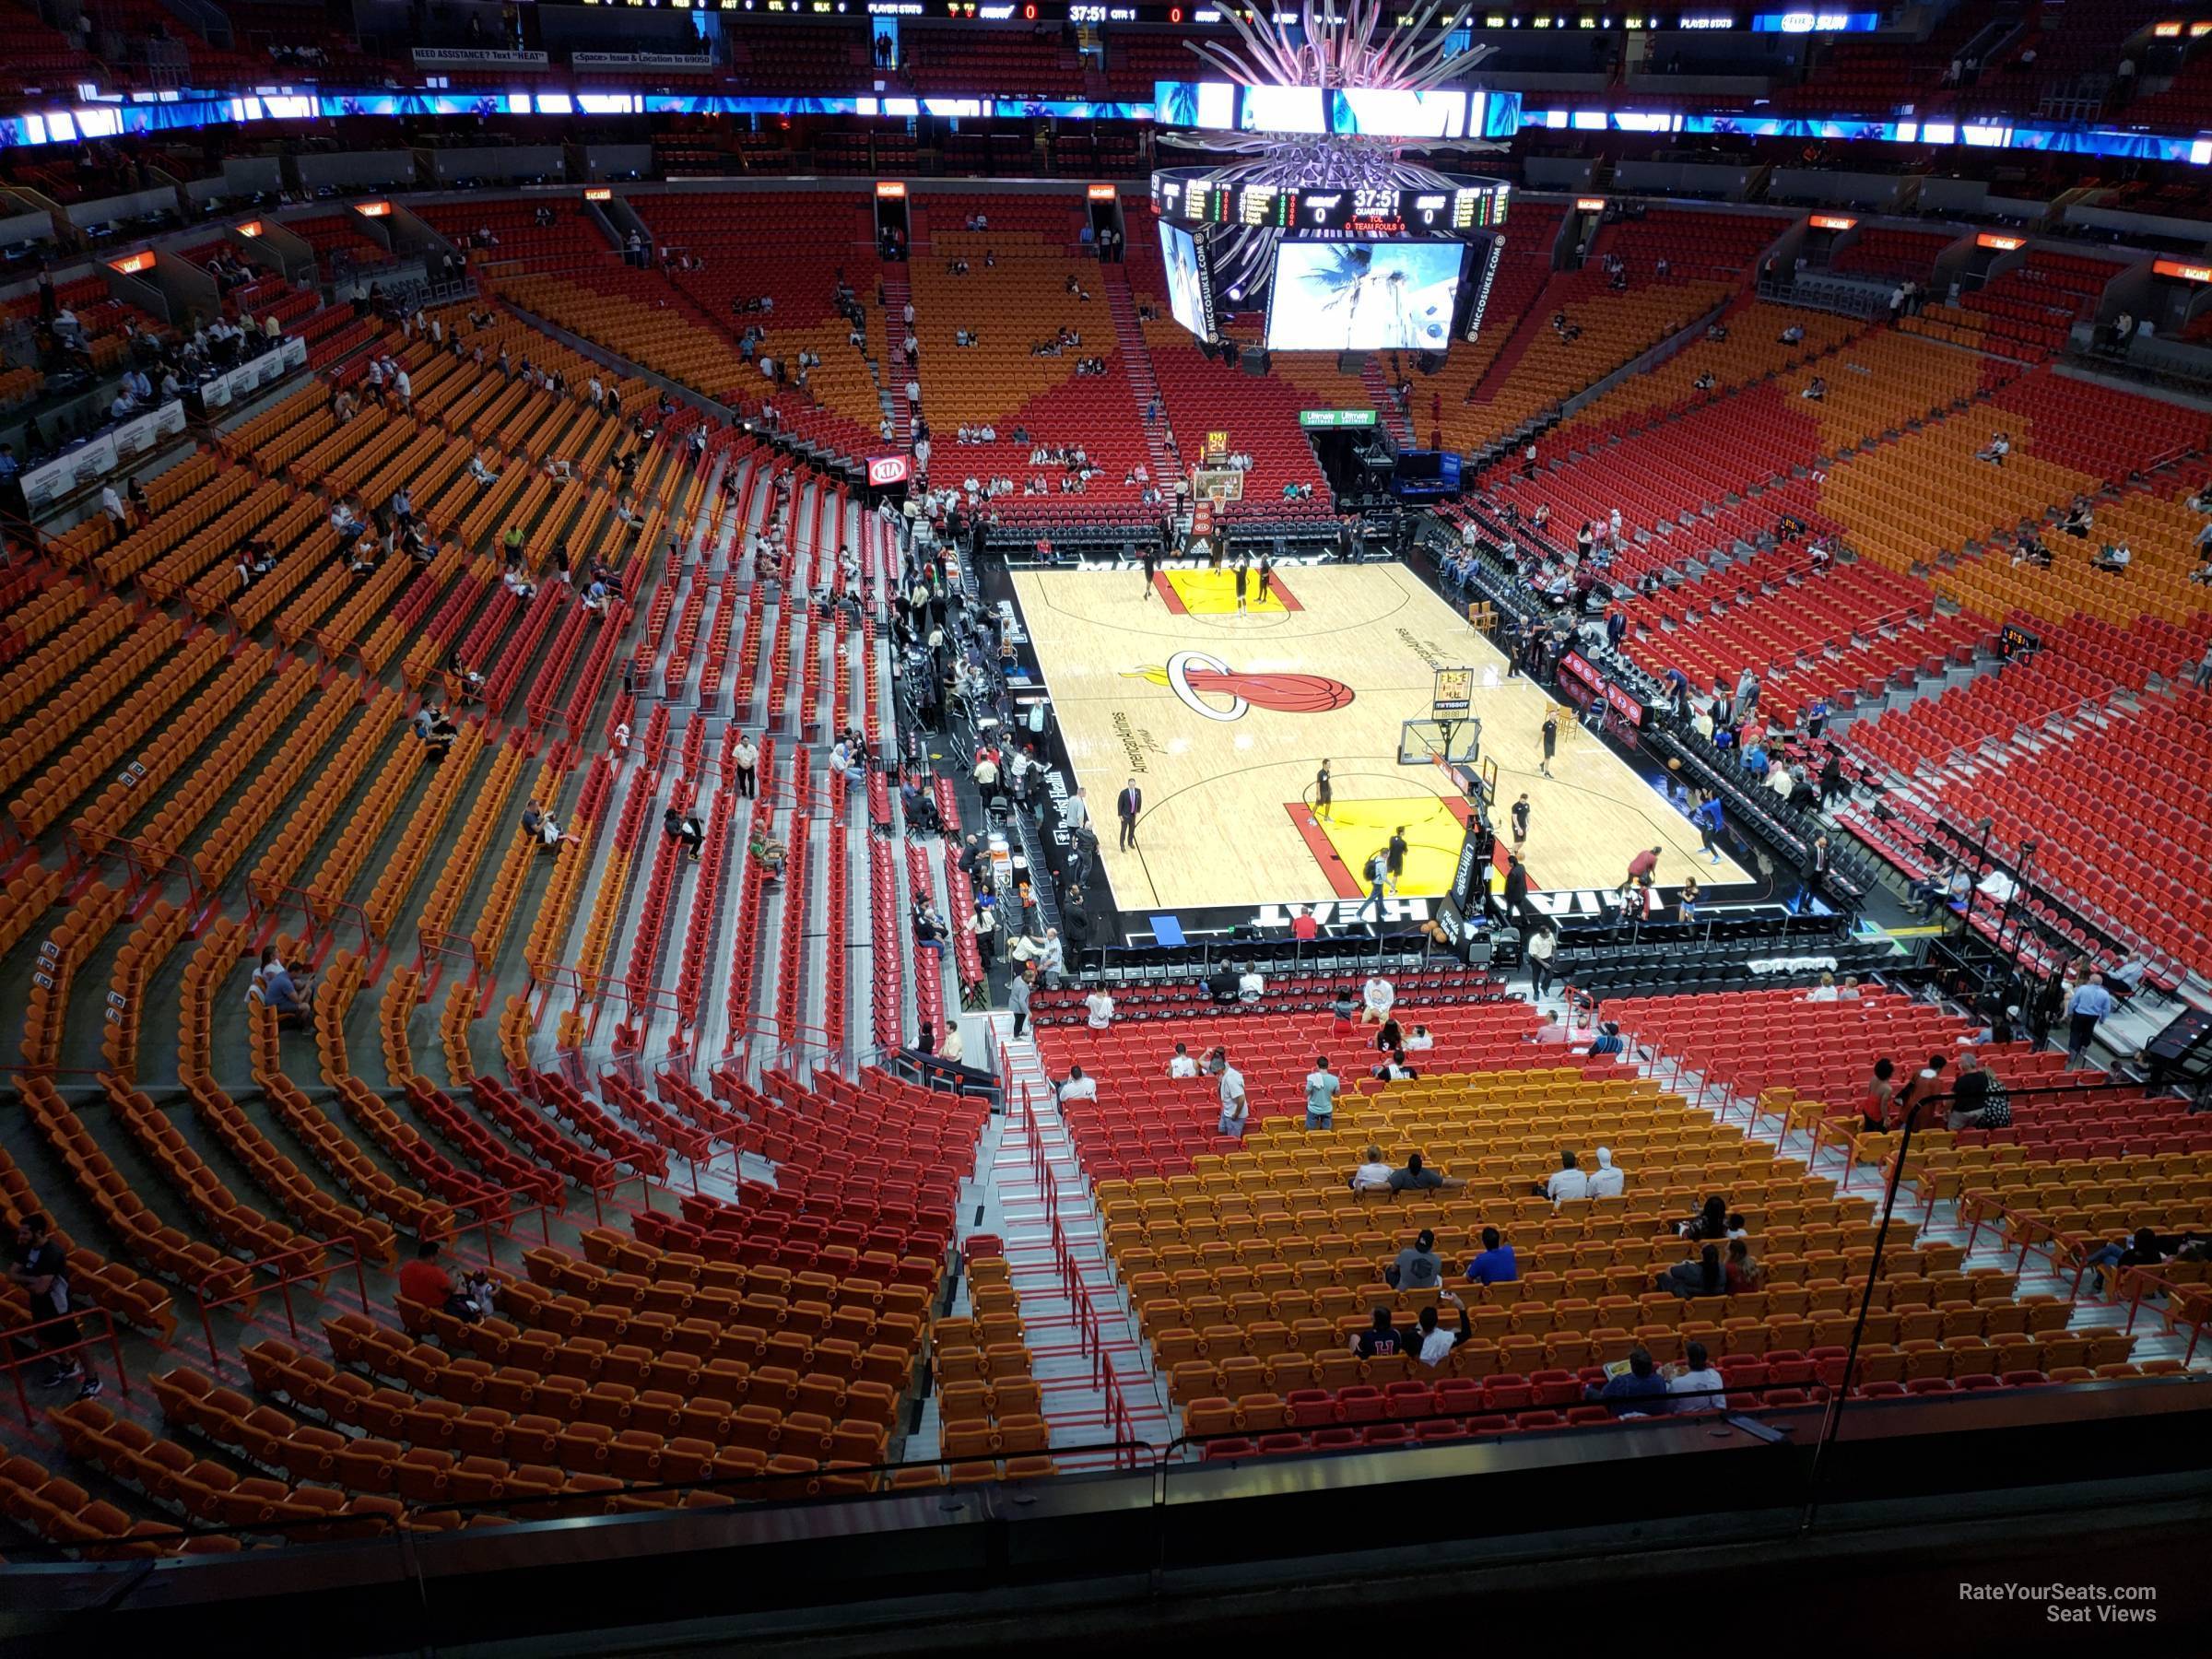 section 301, row 3 seat view  for basketball - kaseya center